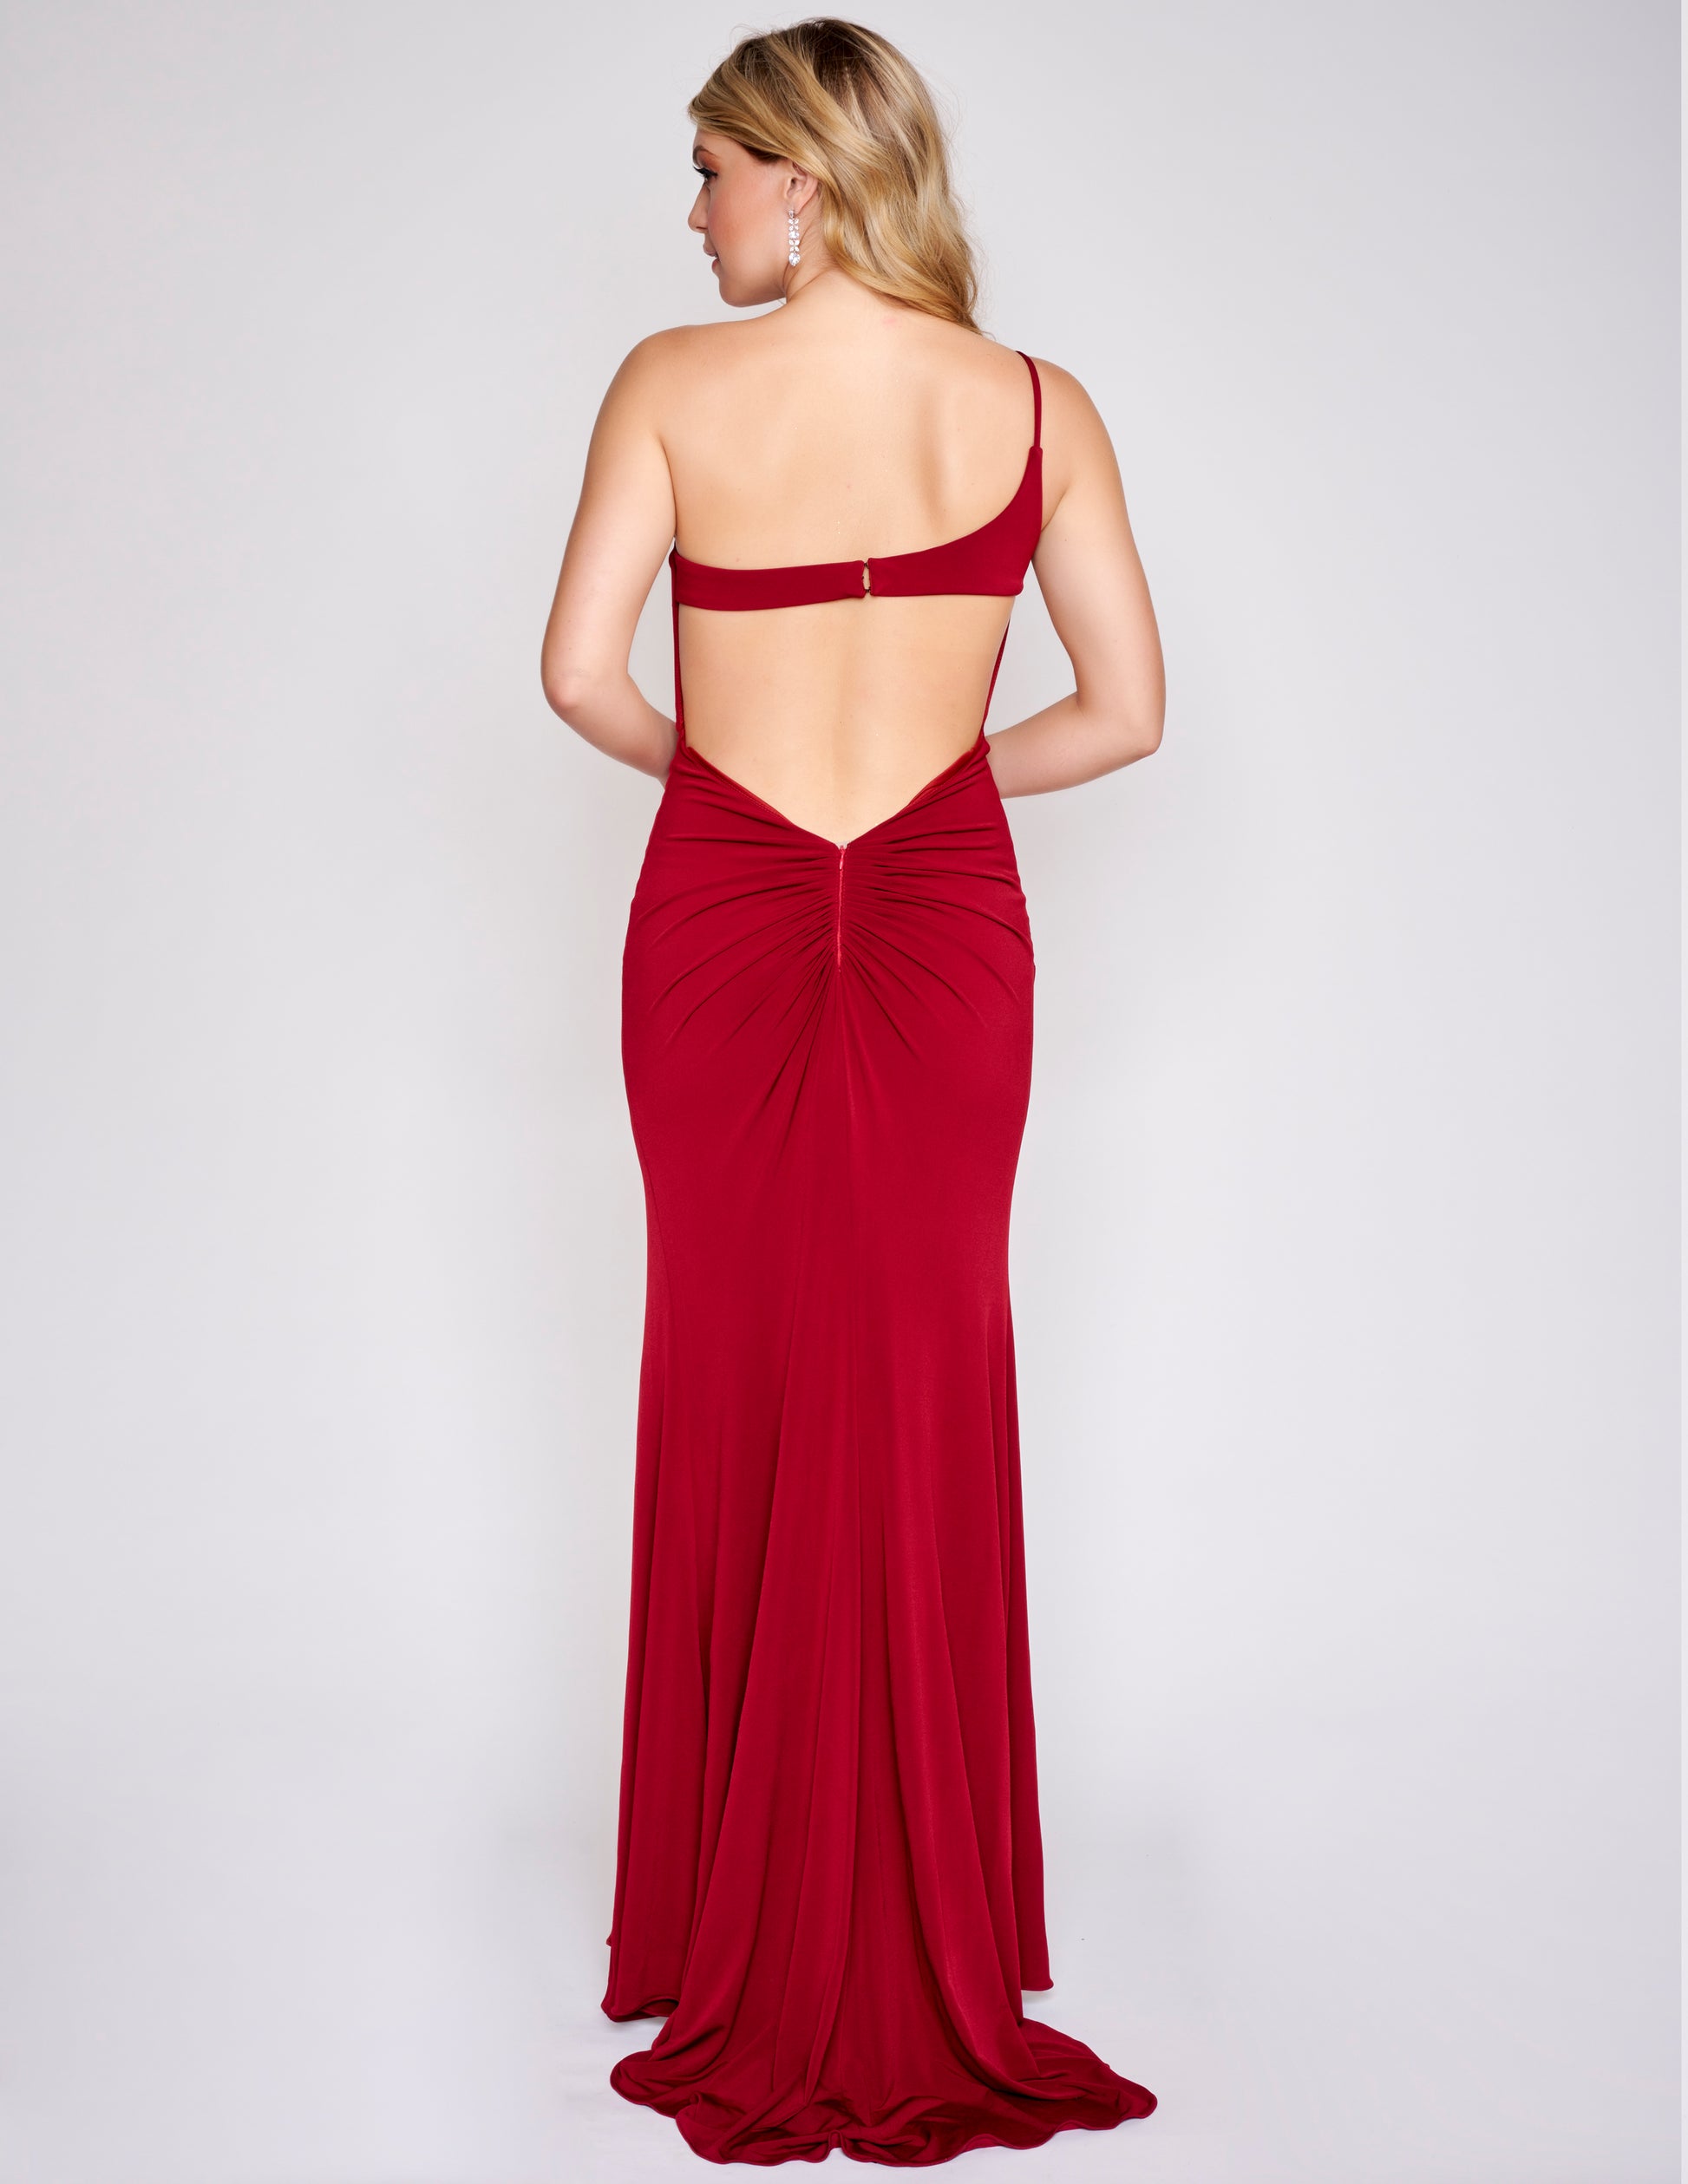 Nina Canacci 2370 One Shoulder Prom Dress Evening Gown Cutout Back Slit Backless